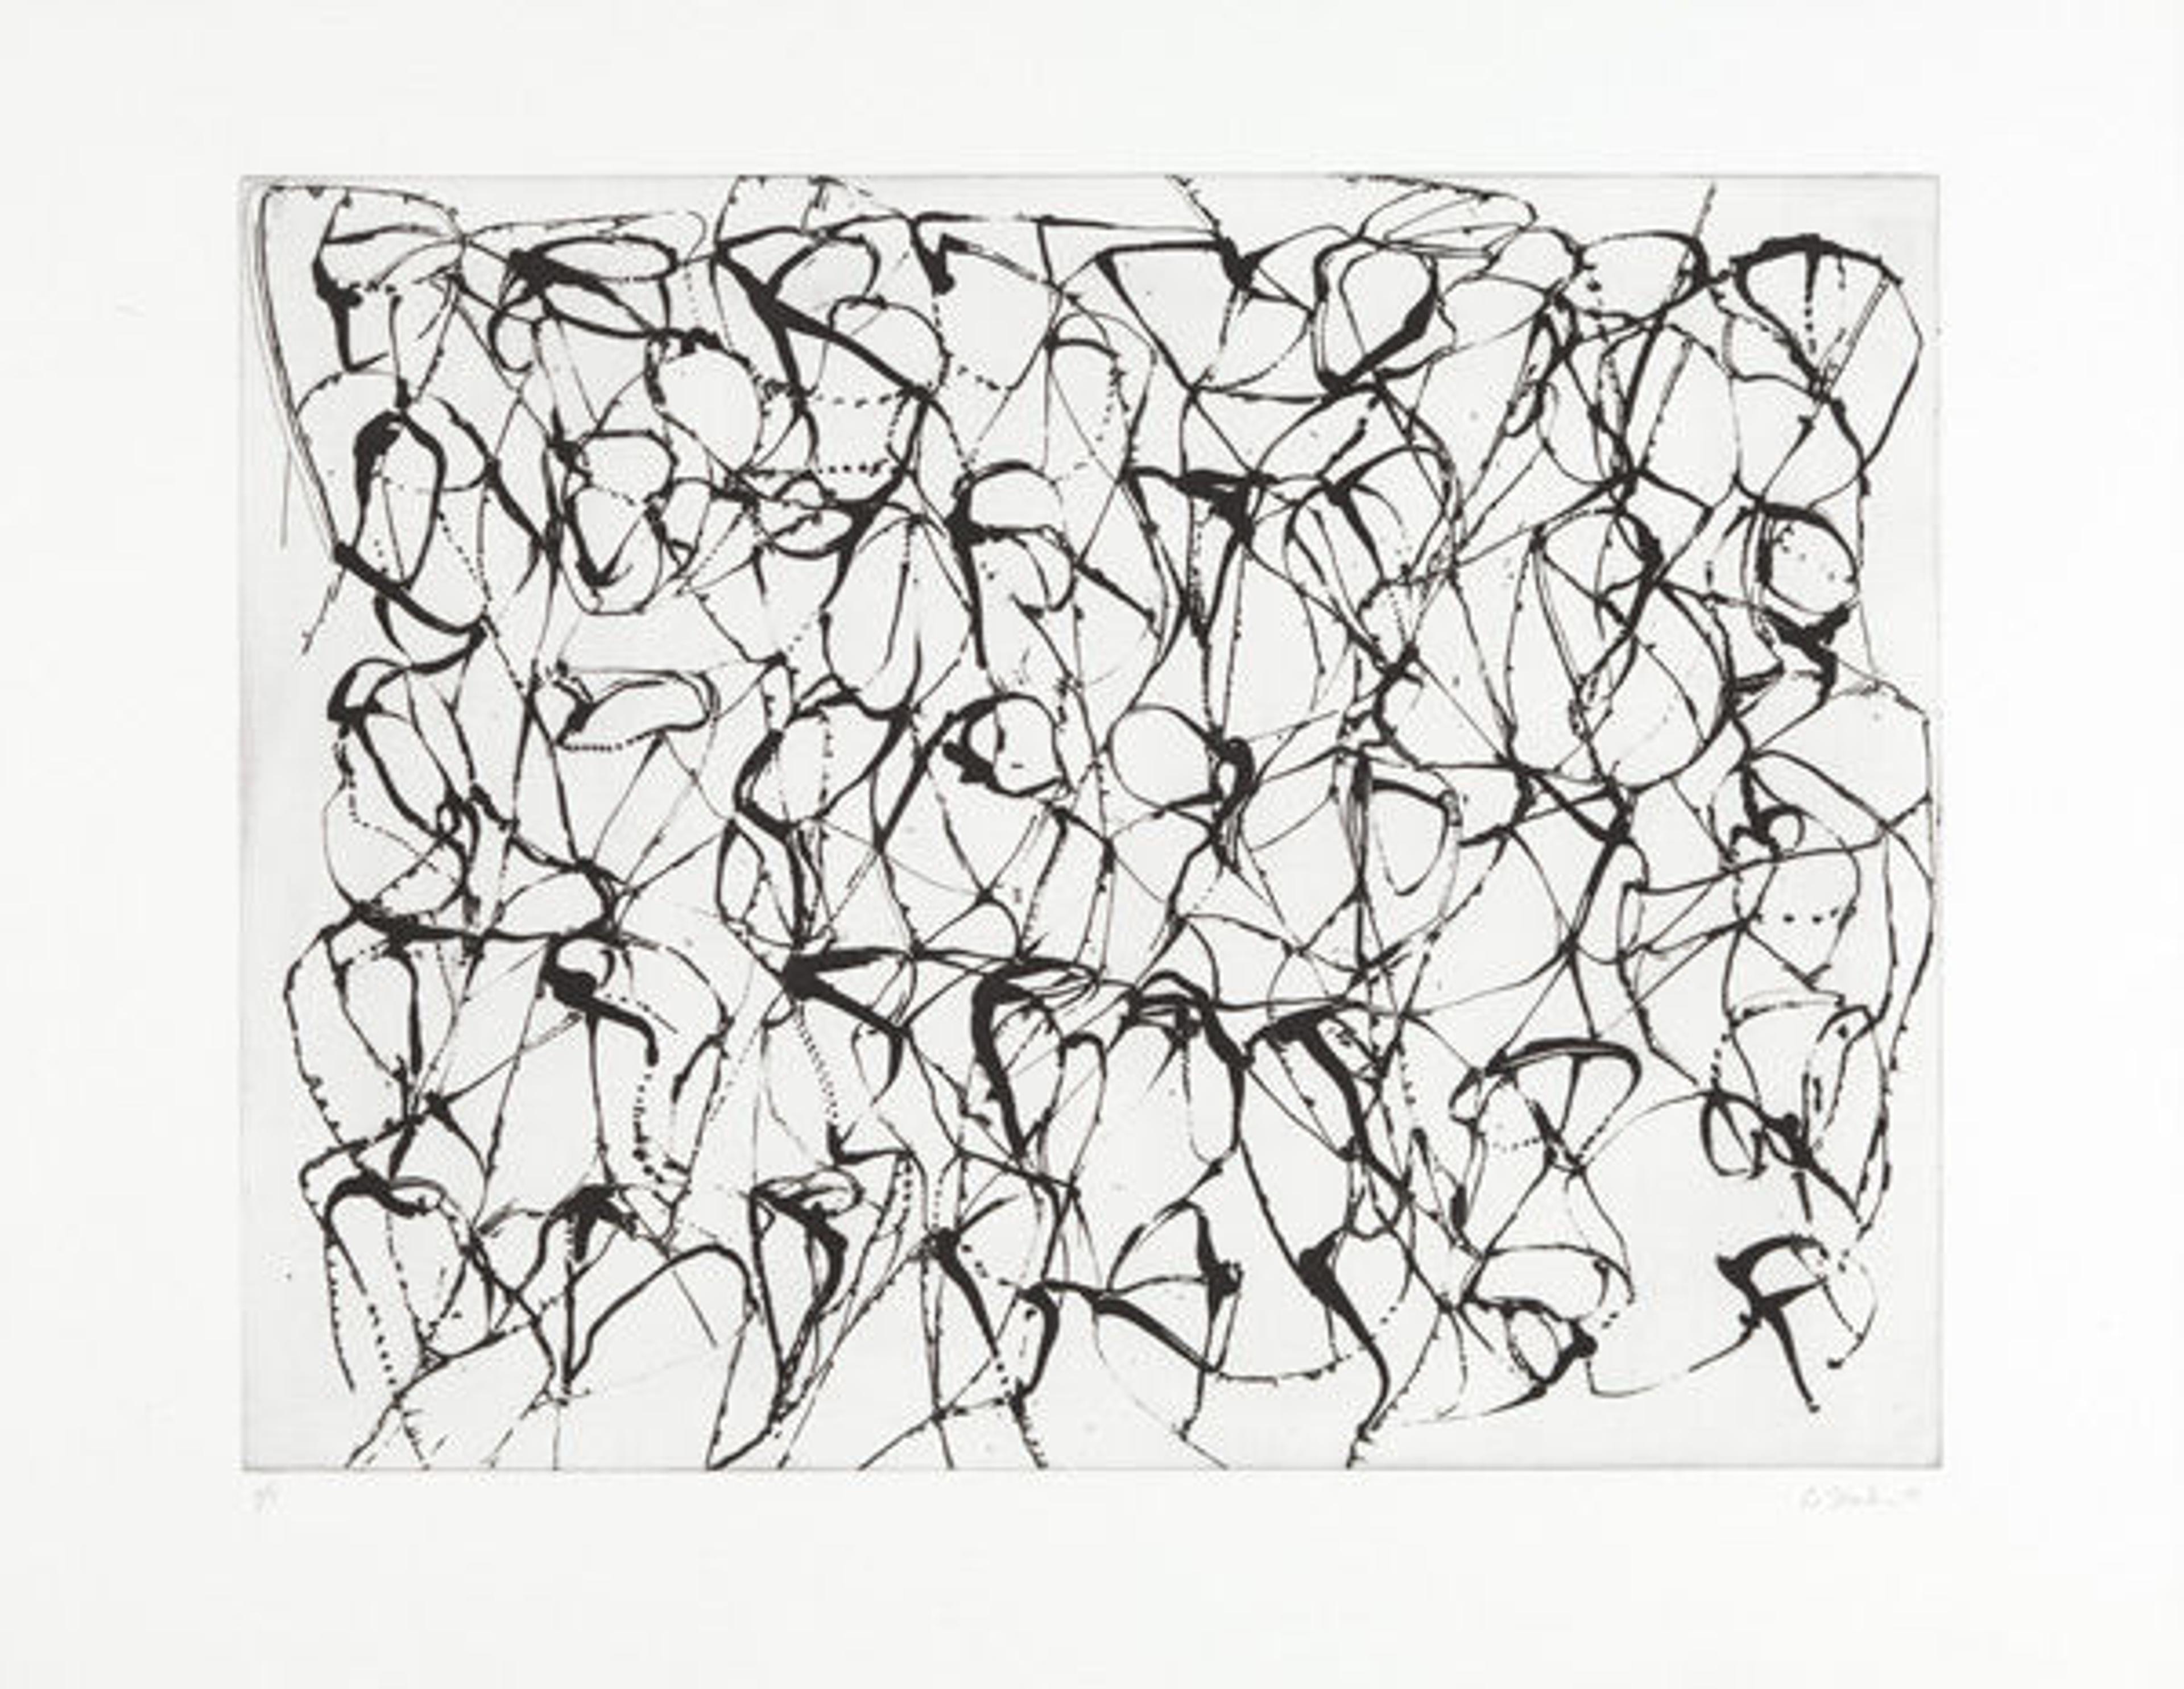 Brice Marden, American (born 1938). Cold Mountain Series, Zen Study 5 (Early State), 1990. Etching with sugarlift aquatint; plate: 20 5/8 x 27 in. (52.5 x 68.6 cm), sheet: 27 1/4 x 35 1/4 (69.5 x 89.5 cm). Printed by Jennifer Melby, New York. The Metropolitan Museum of Art, New York, John B. Turner Fund, 1991 (1991.1059)